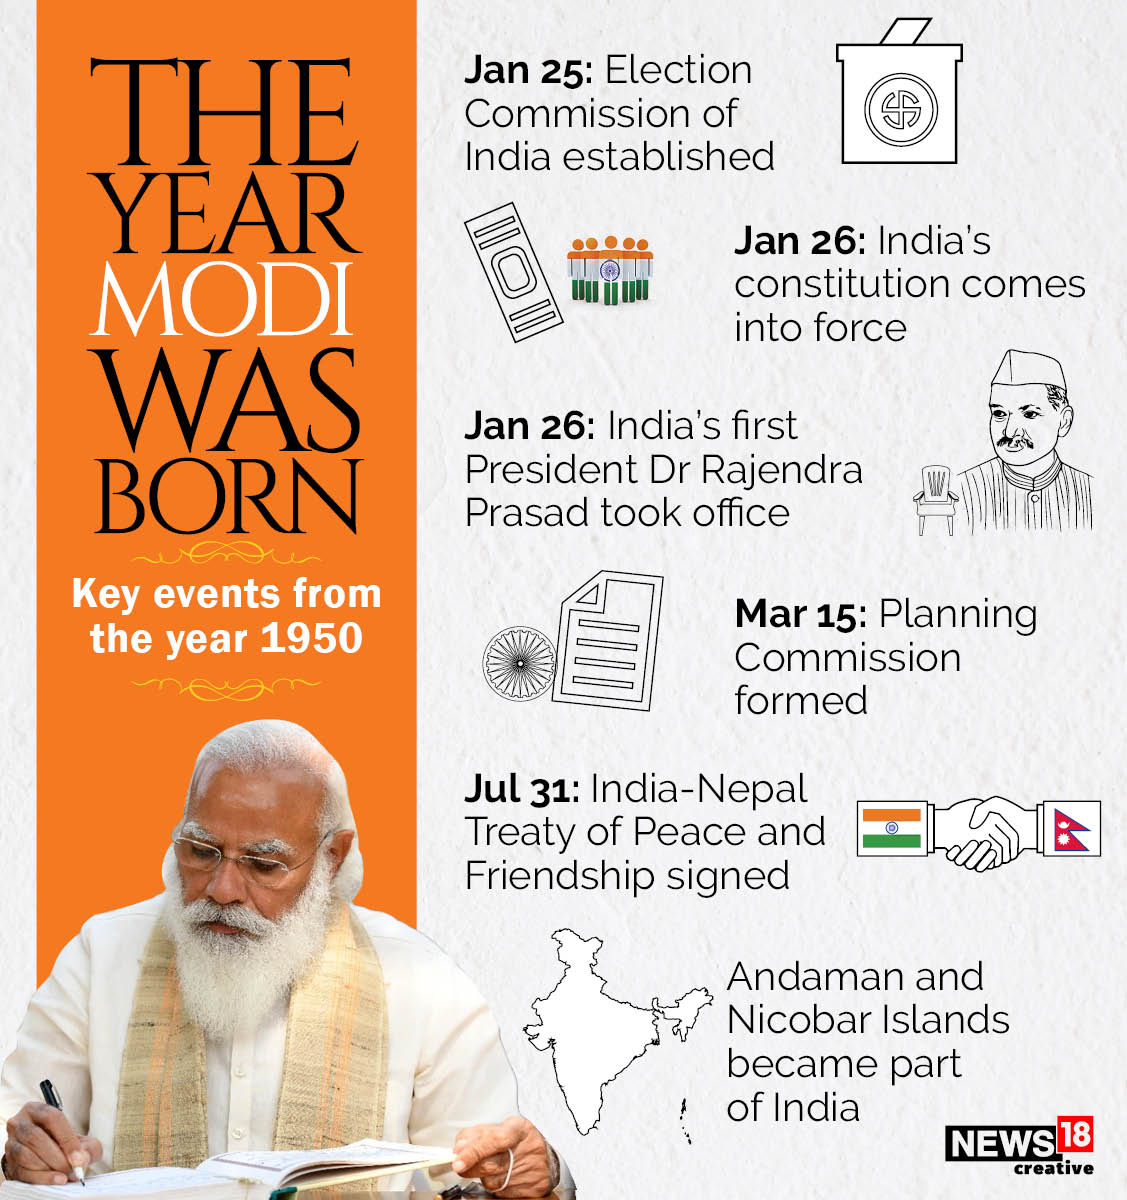 The year 1950 is the common thread binding Narendra Modi and Indian Constitution coming into force